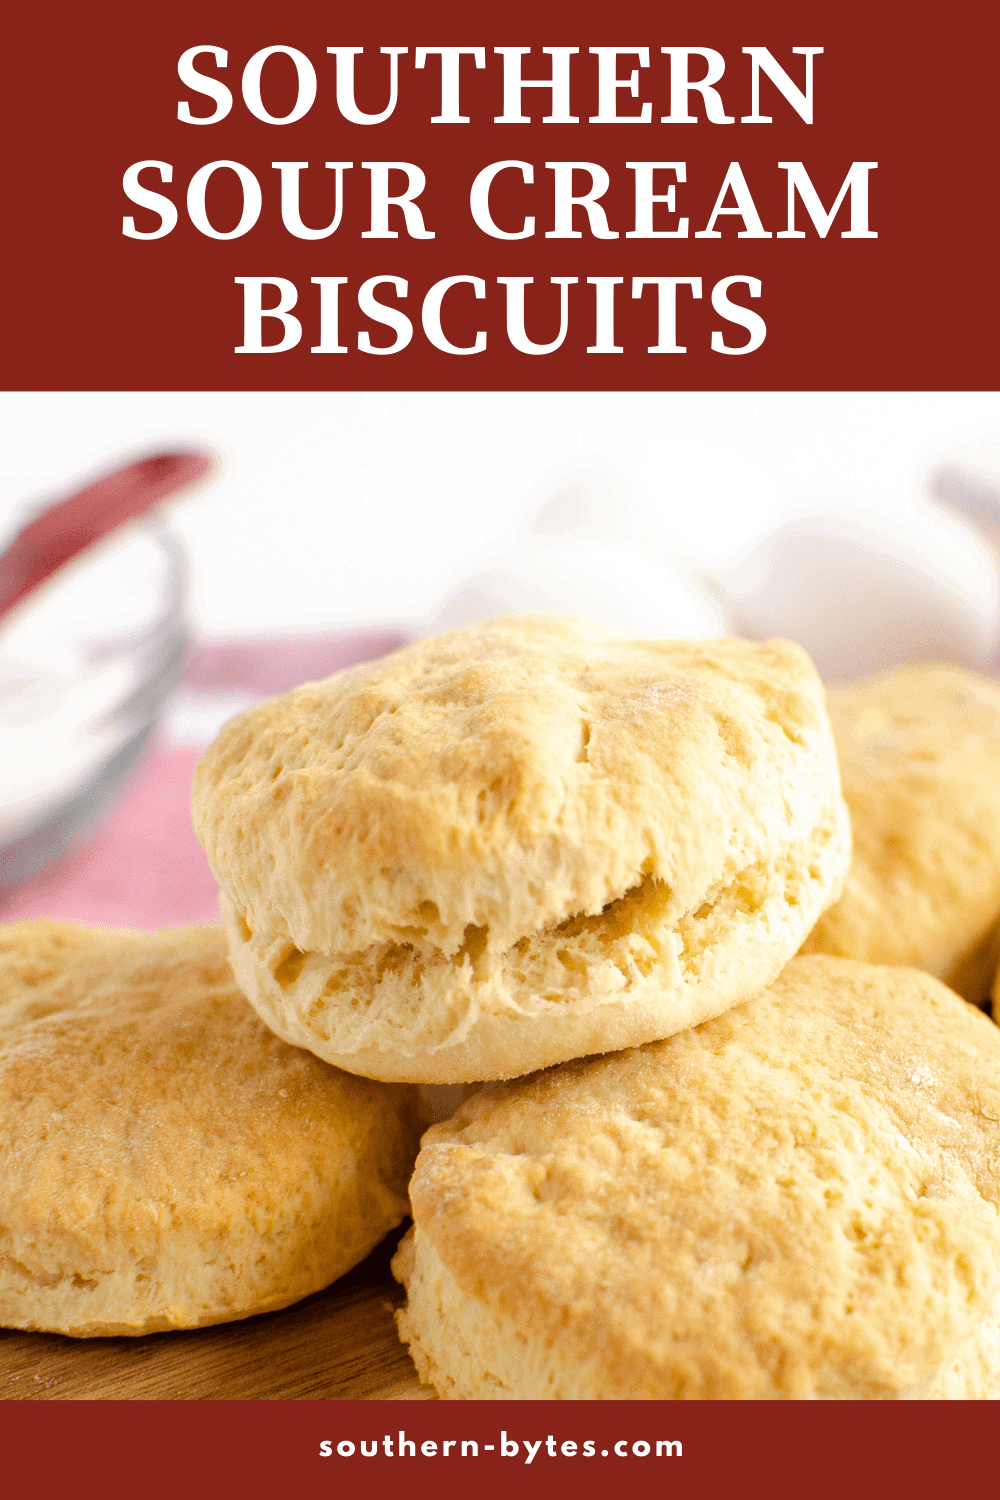 A pin image of a pile of southern sour cream biscuits.